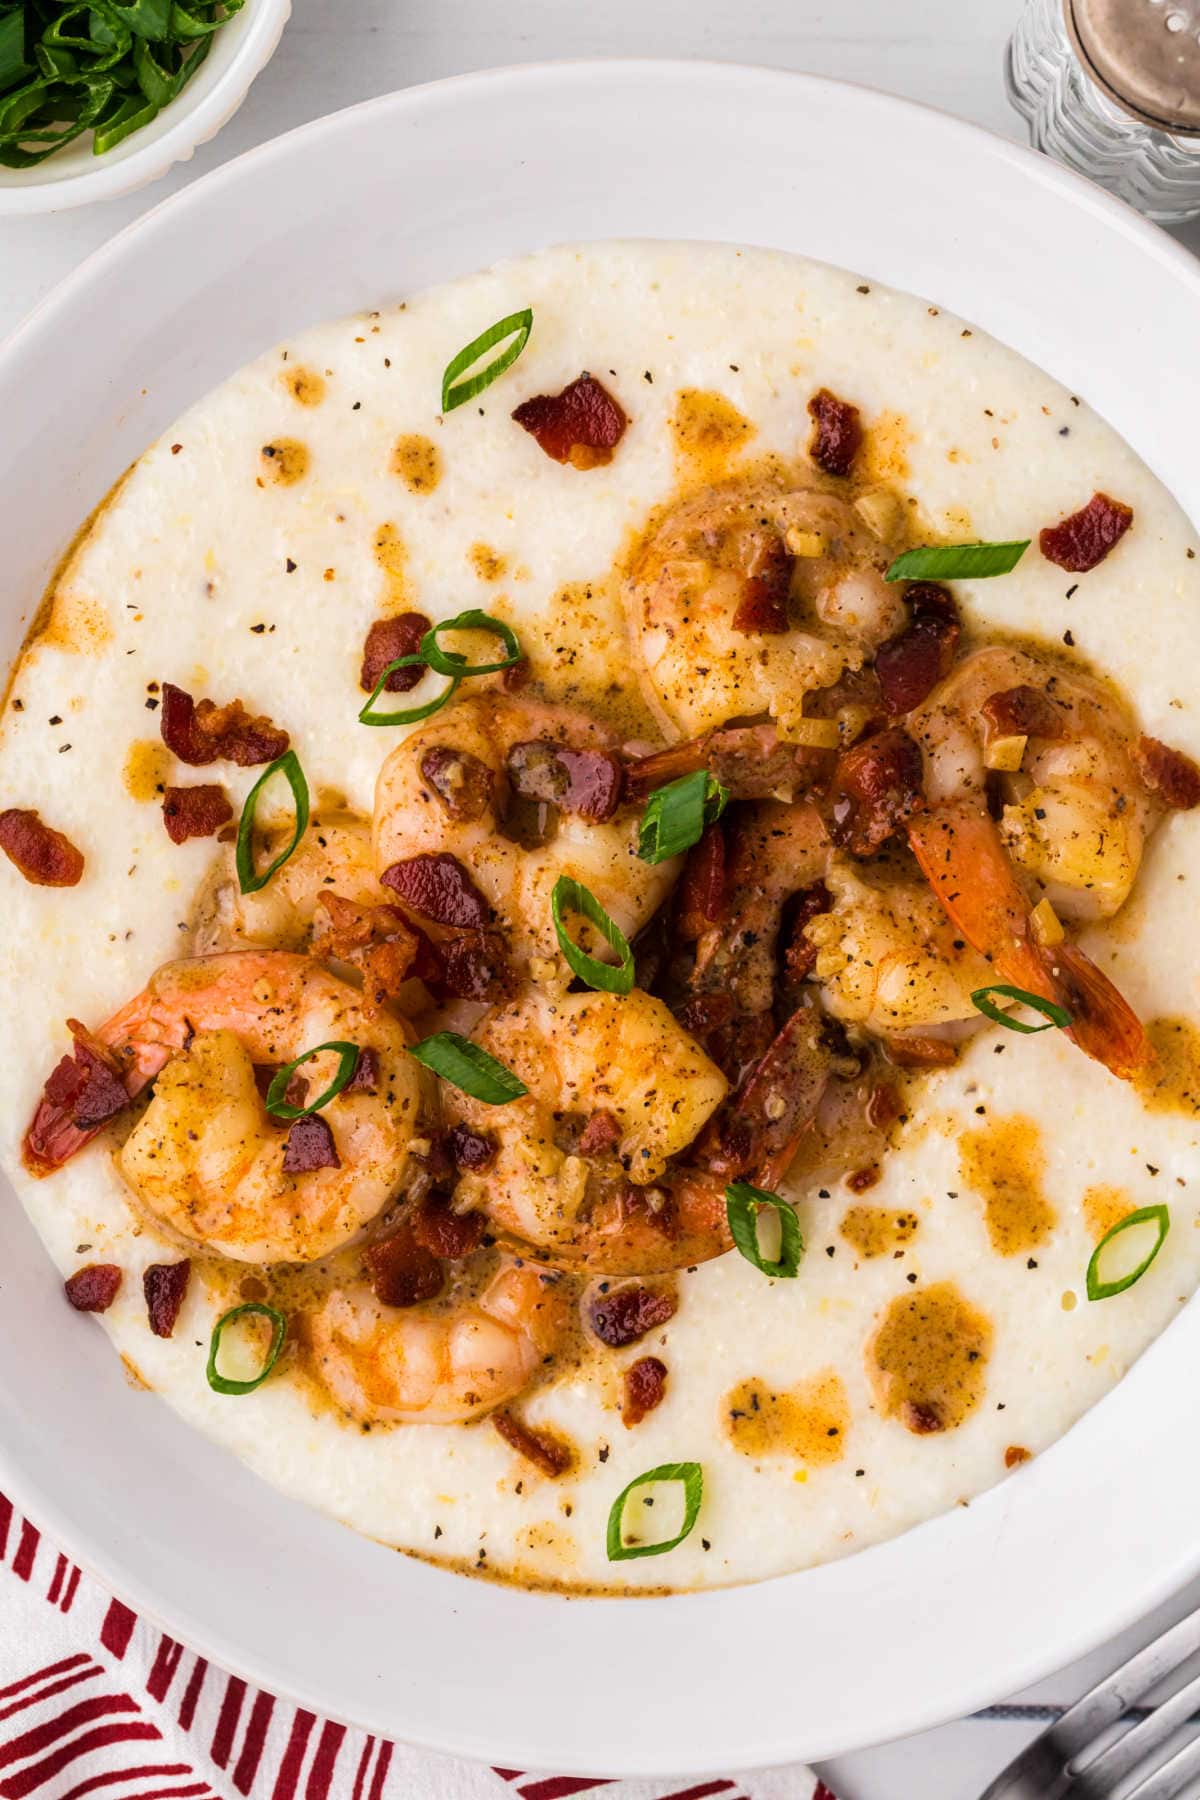 Overhead view of cajun shrimp and grits.